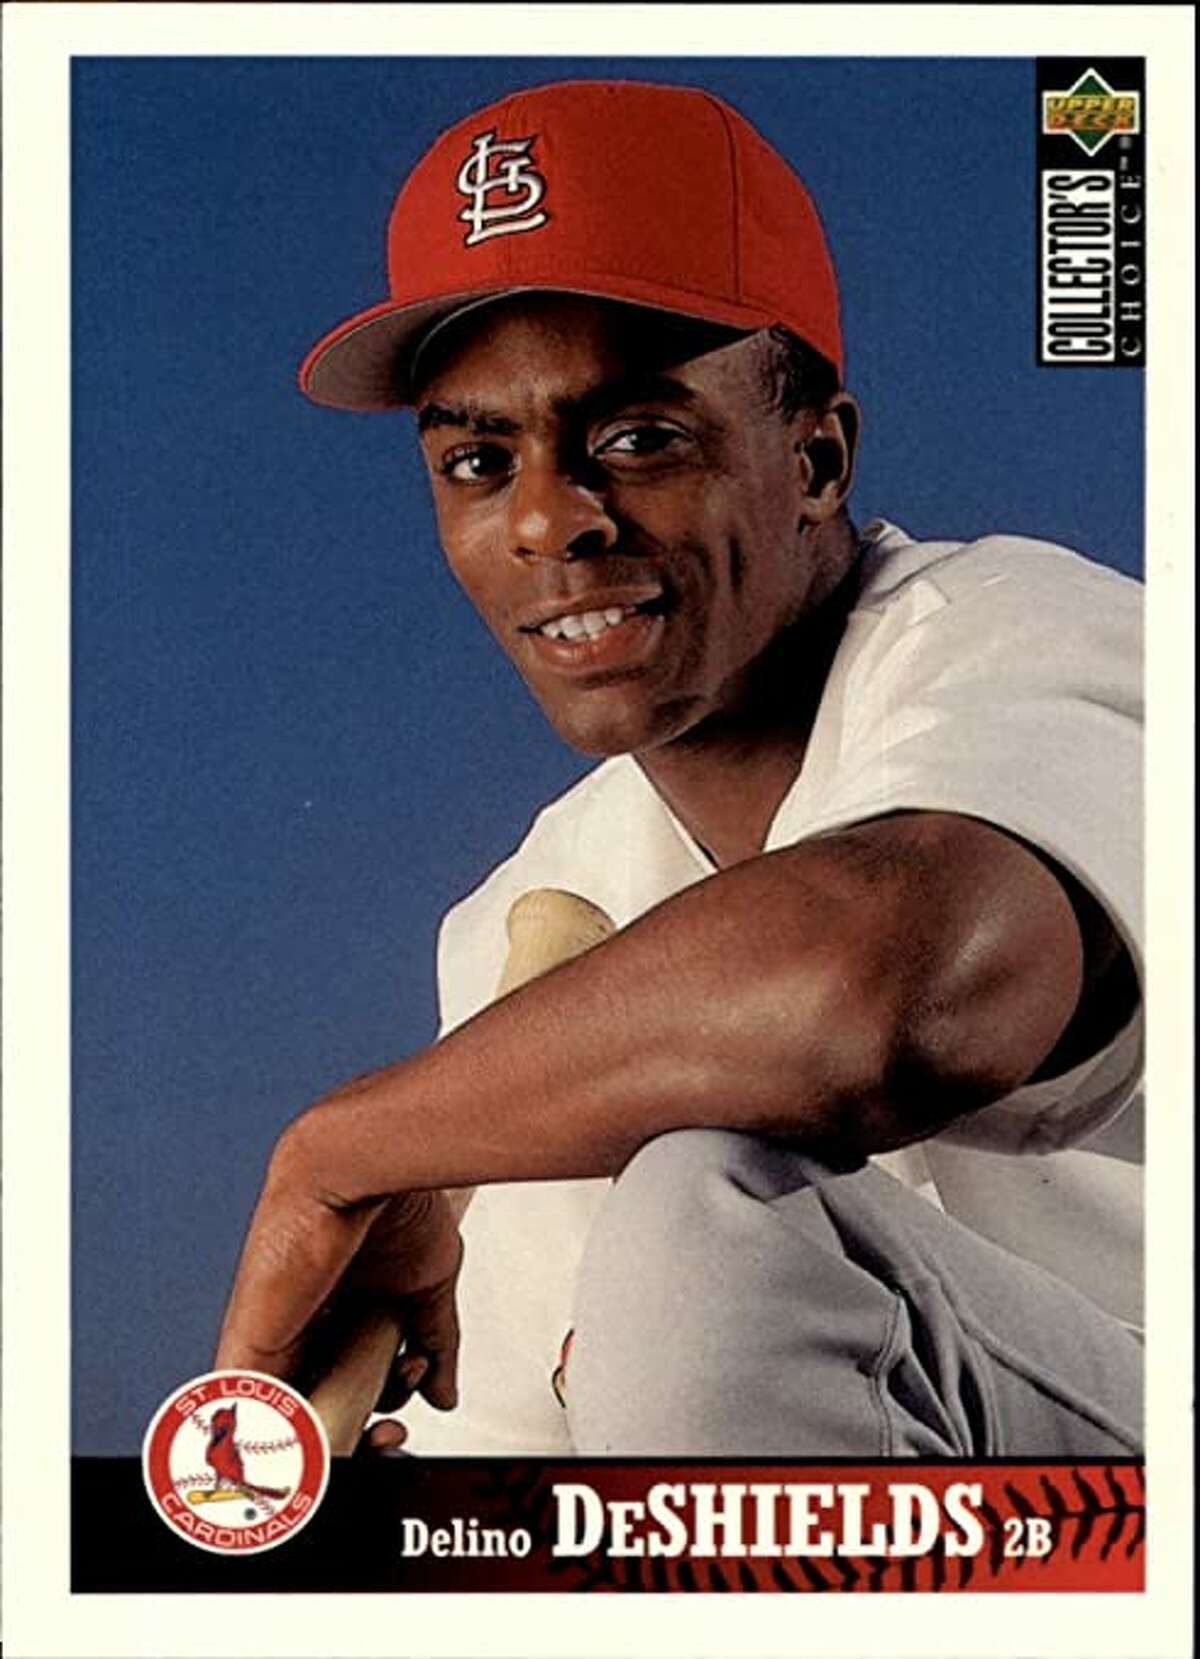 Delino DeShields' 1997 Collector's Choice Upper Deck baseball card. DeShields played for the Cardinals in 1997 and 1998.